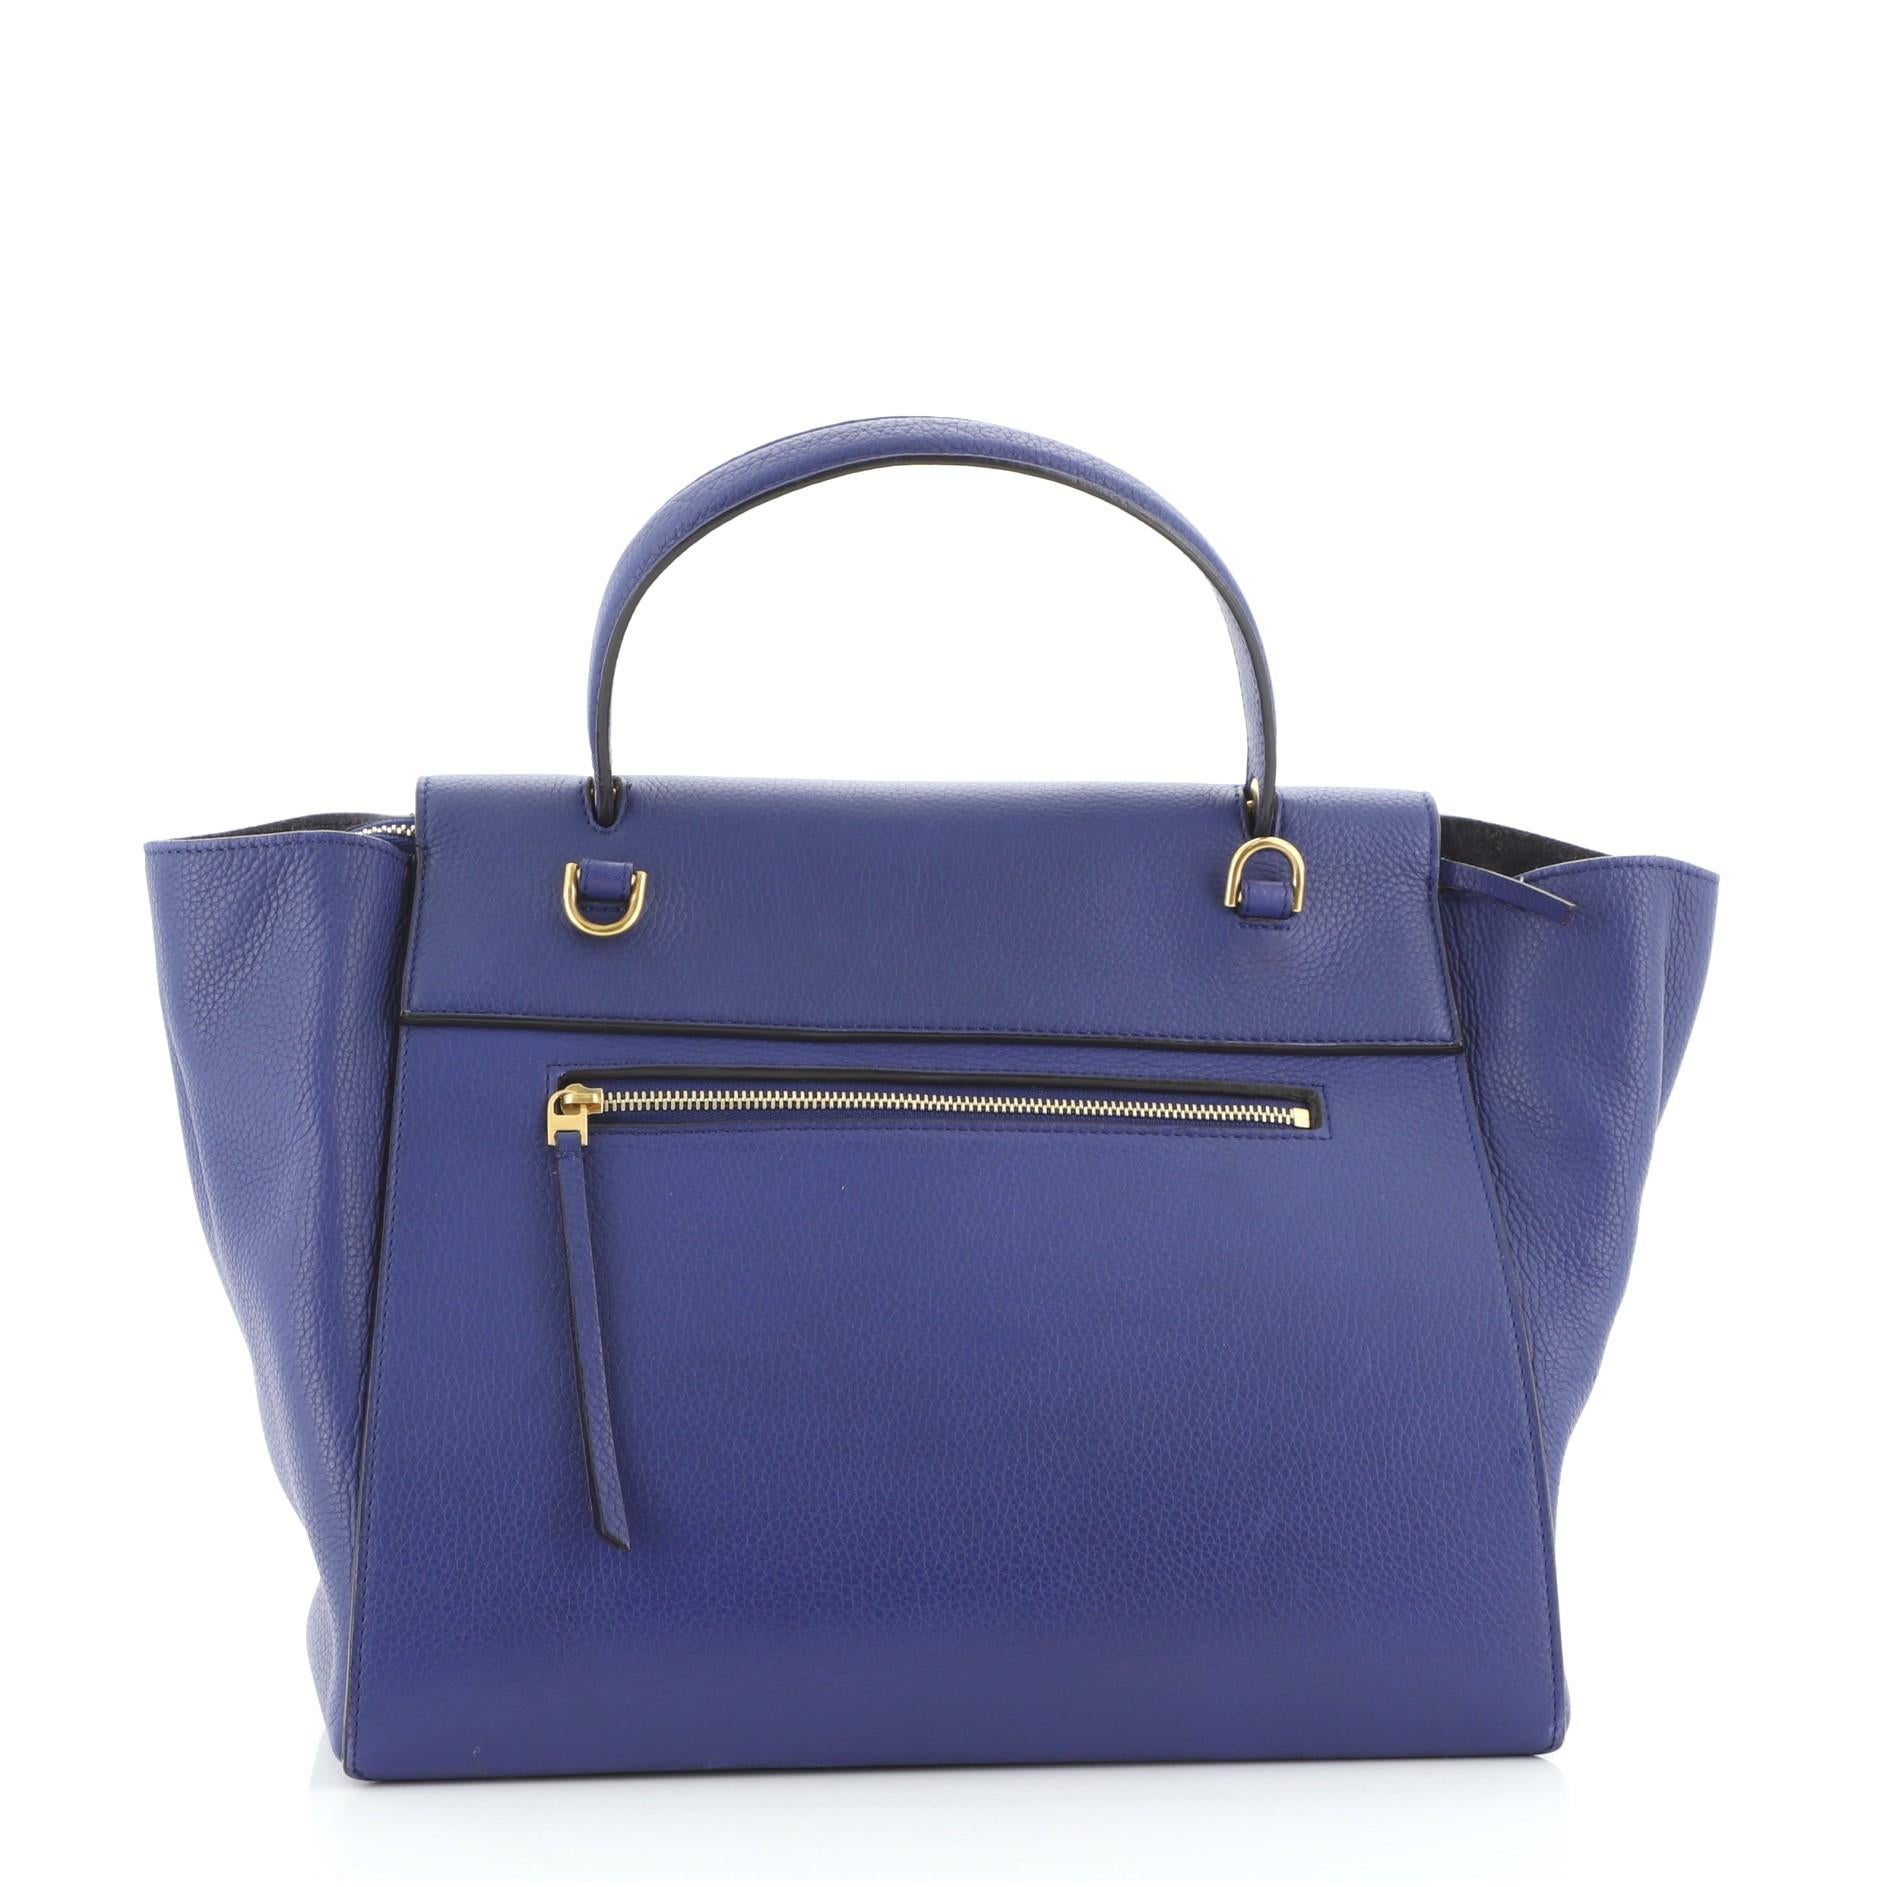 Celine Belt Bag Textured Leather Medium
Blue

Condition Details: Creasing and scuffs on exterior, splitting on base corner wax edges, minor cracking on opening corner wax edges. Moderate wear and discoloration in interior, scratches on